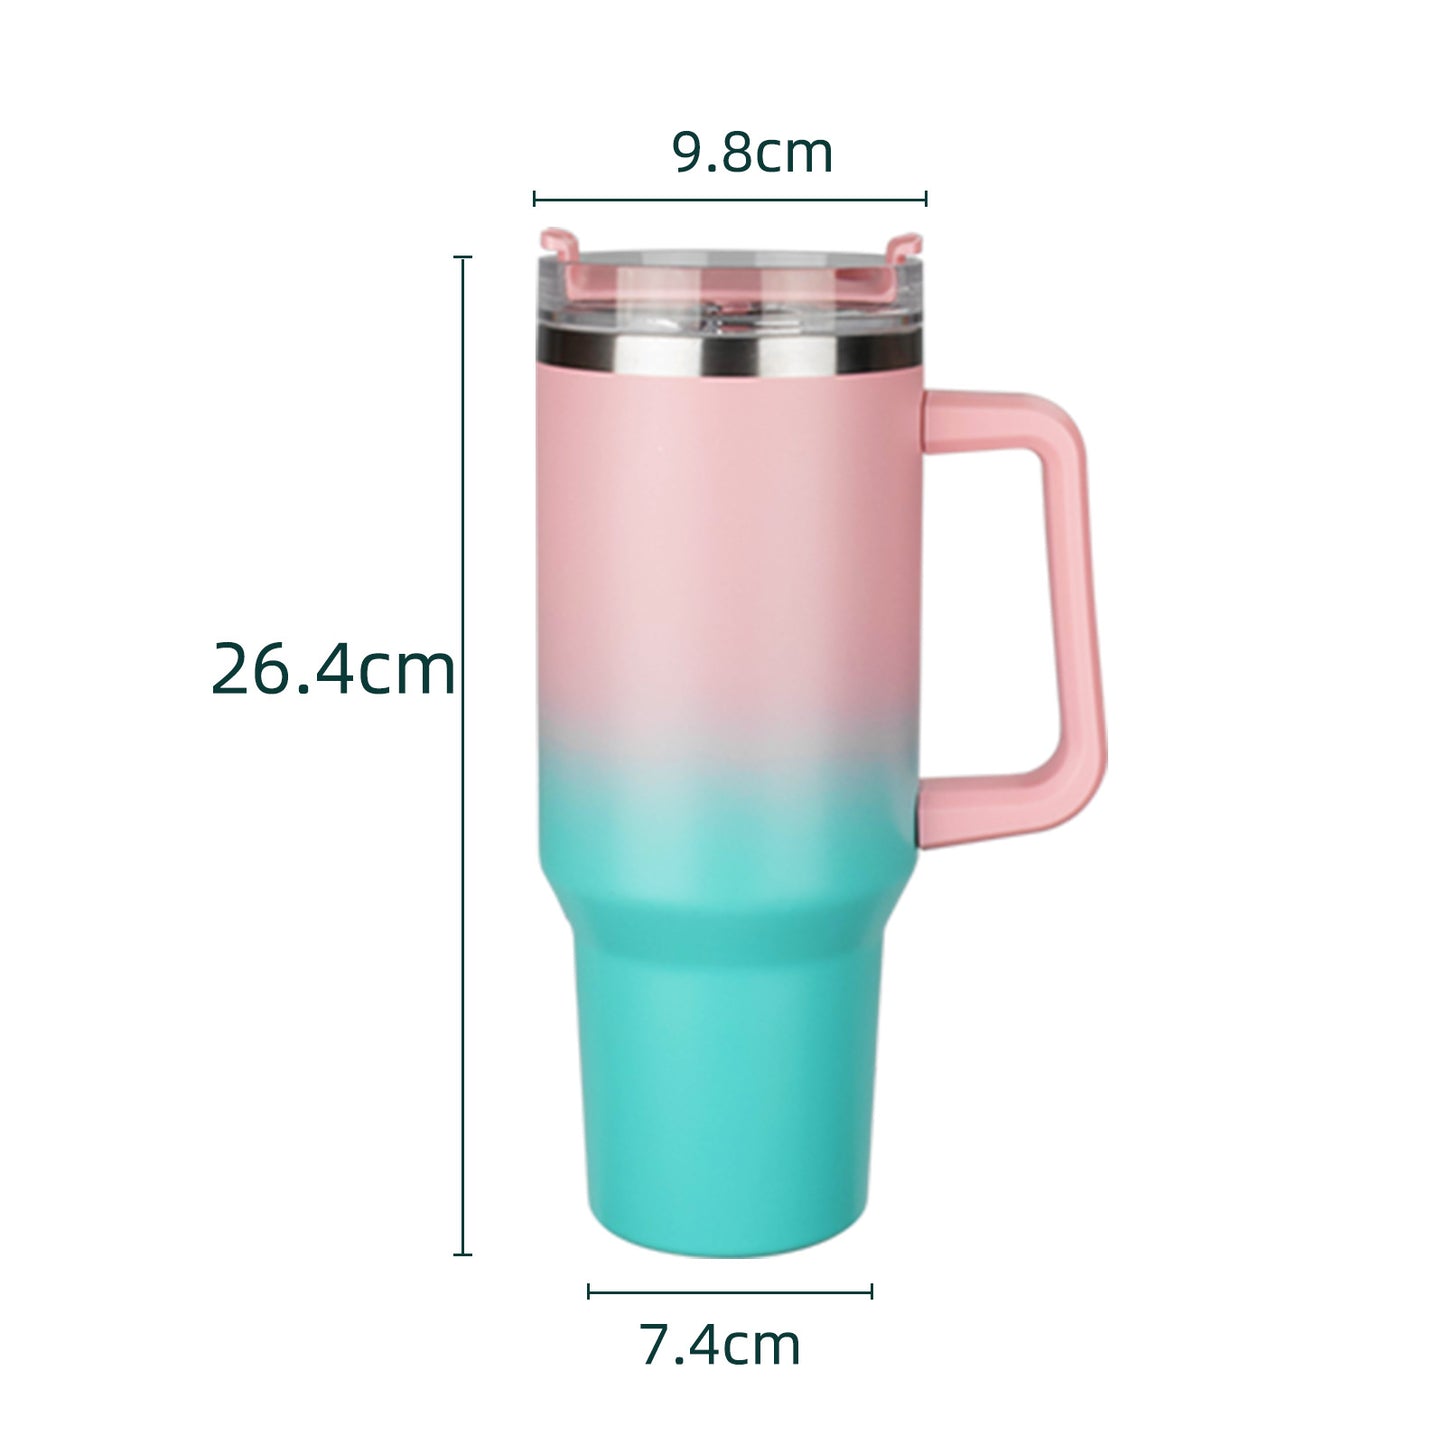 Insulated Reusable Stainless Steel Travel Mug Keeps Drinks Cold up to 24 Hours, 40 oz Tumbler with Handle and Straw Lid